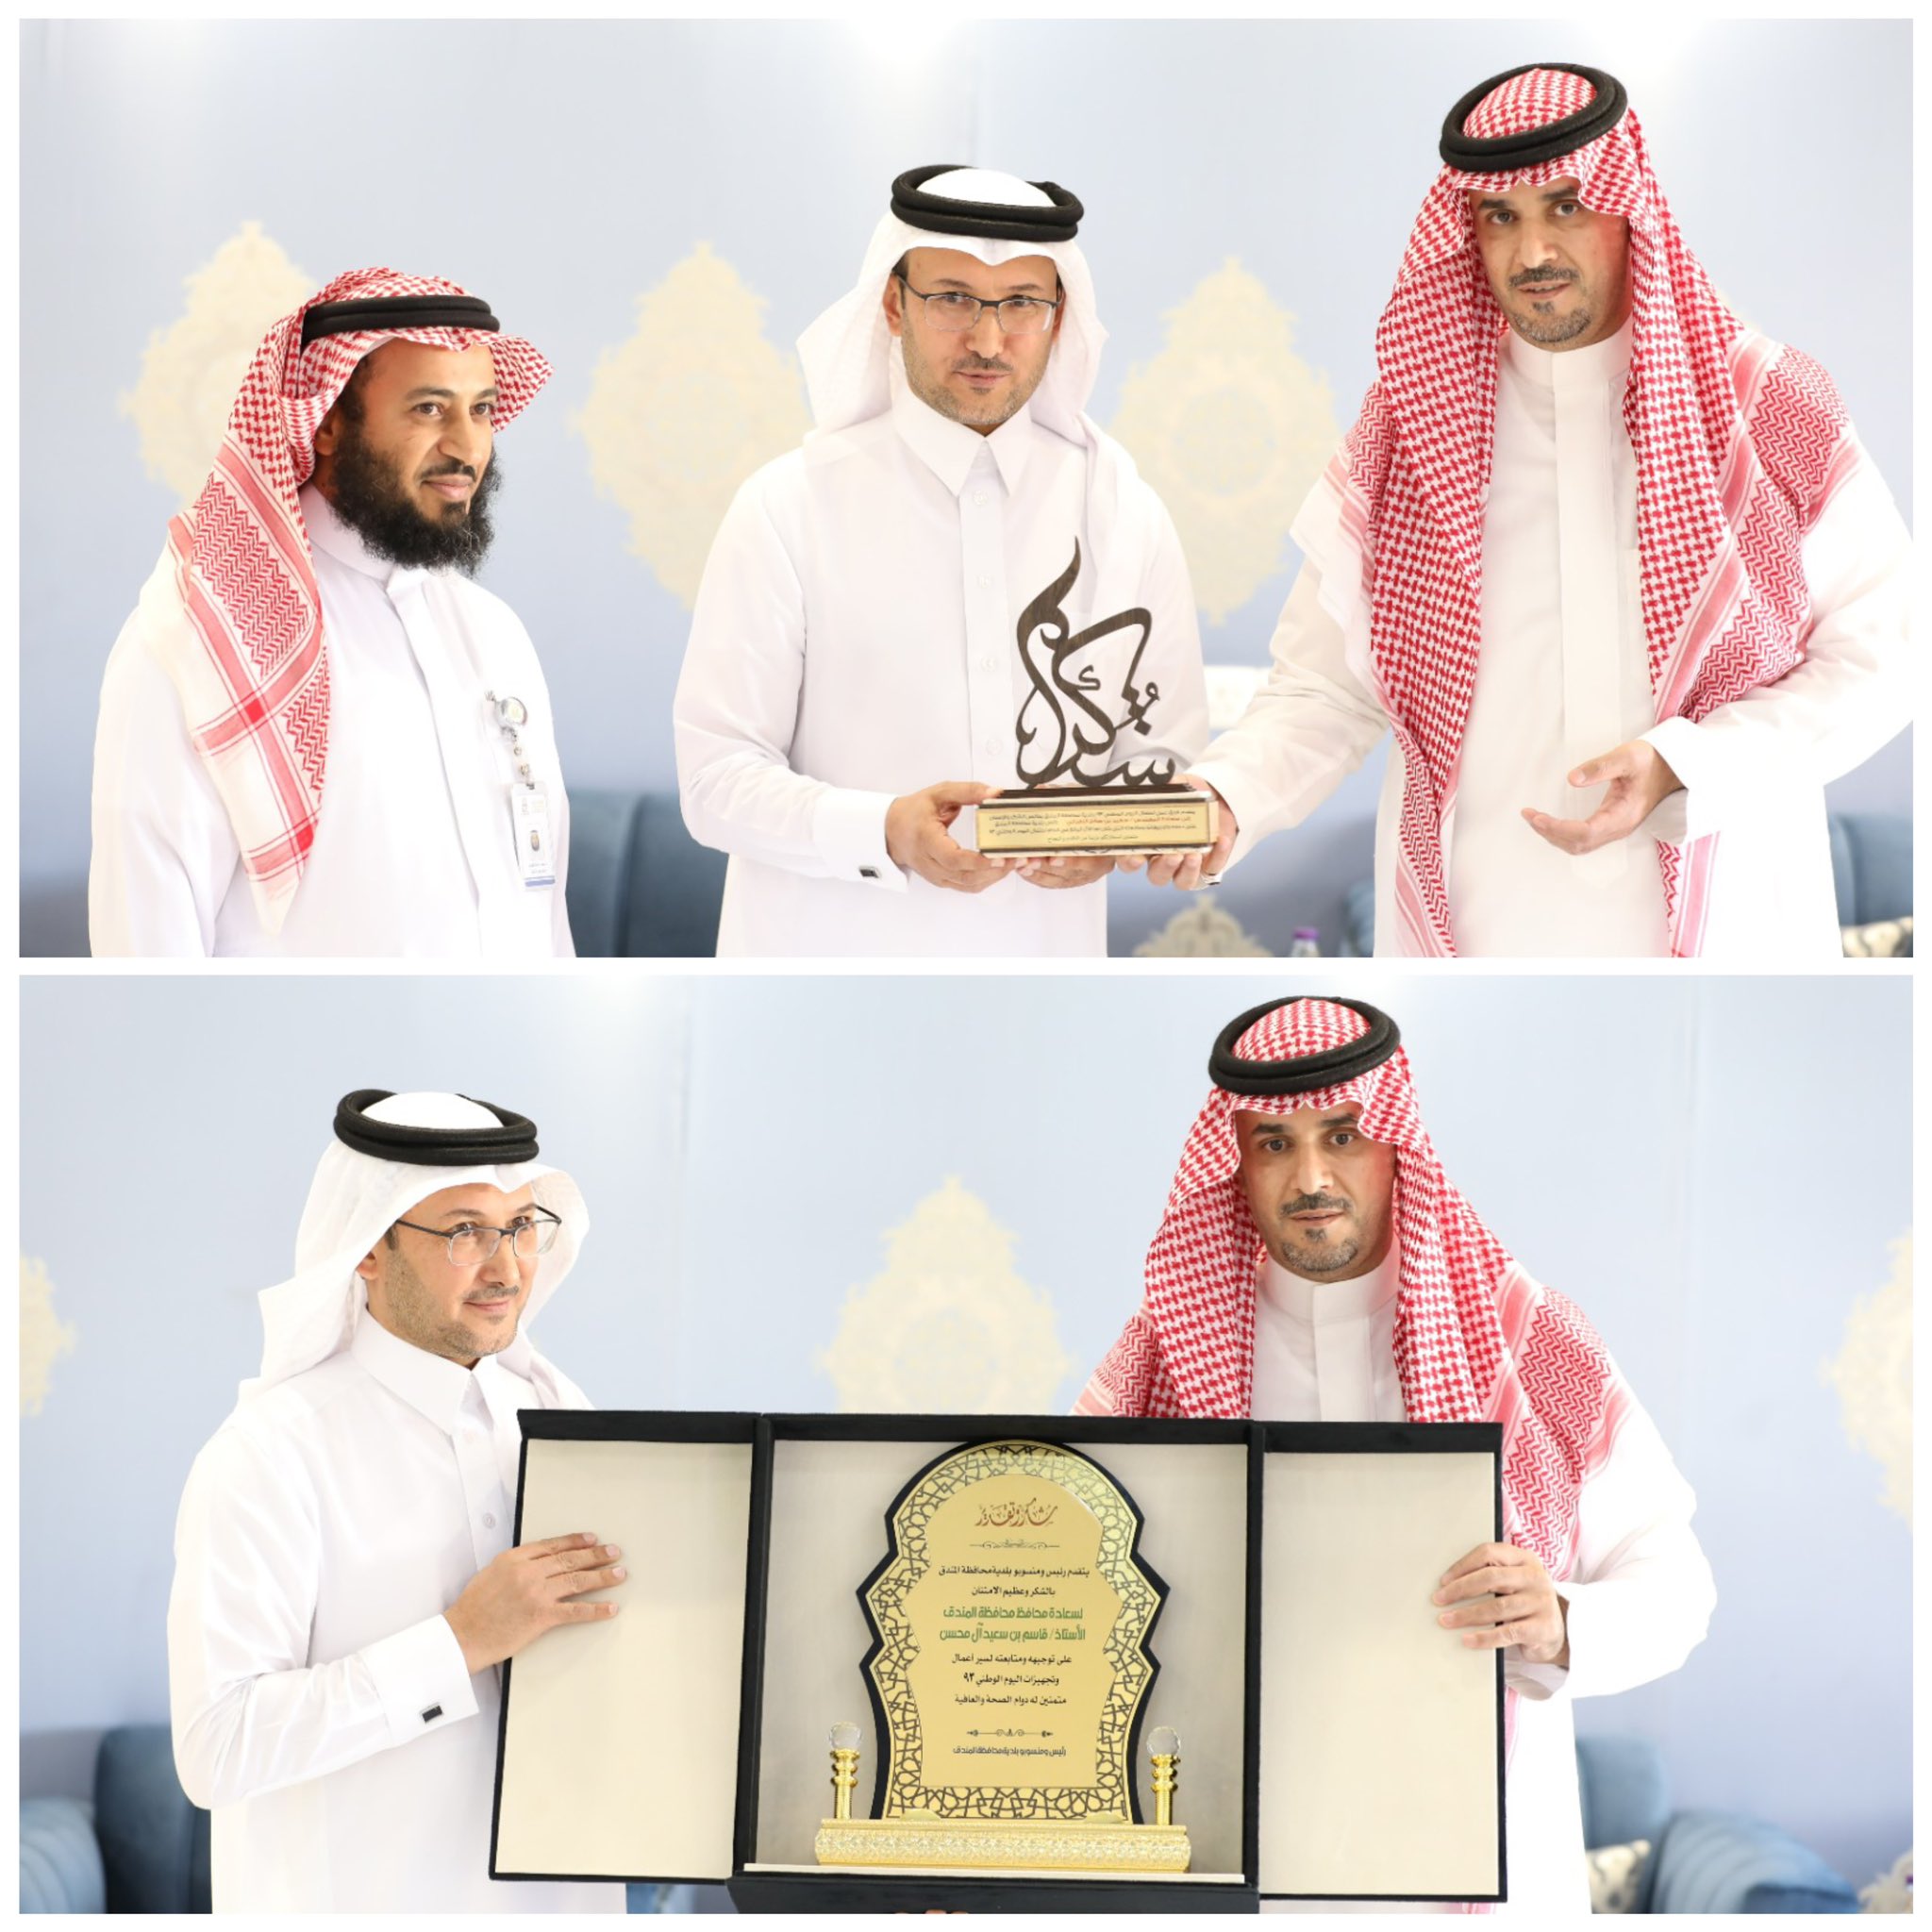 Honoring the employees who participated in the success of the 93rd National Day celebration